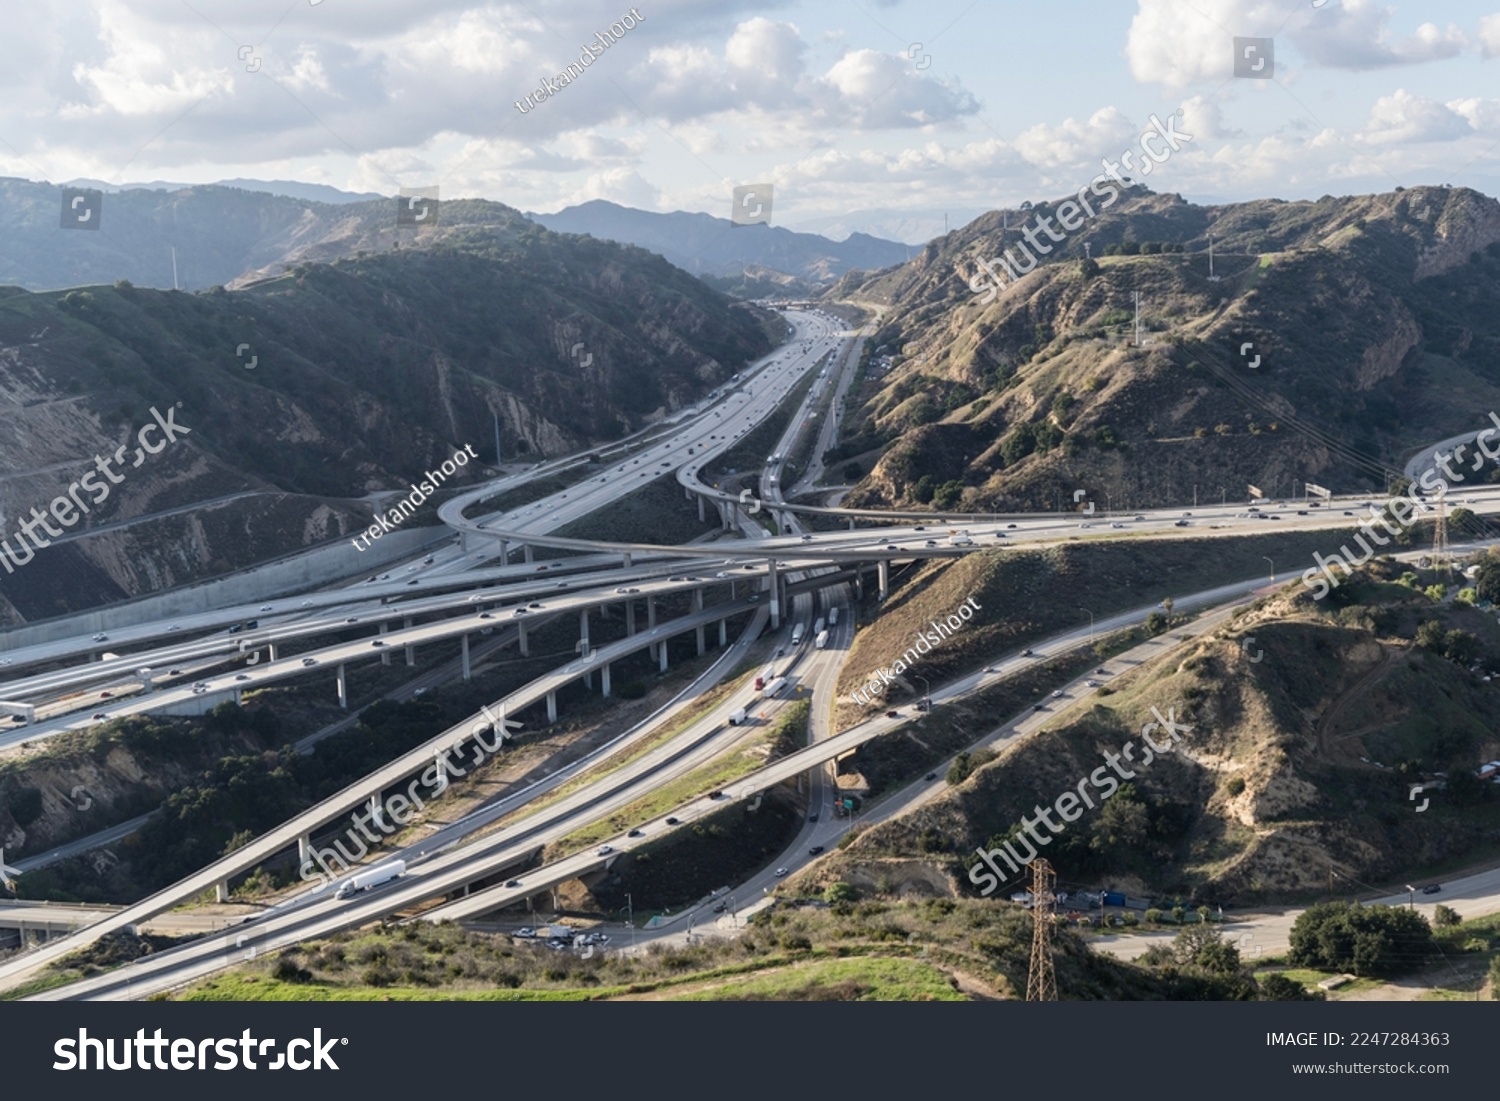 Aerial view of the Golden State 5 and Antelope Valley 14 freeways in the Newhall Pass between Los Angeles and Santa Clarita in Southern California. #2247284363